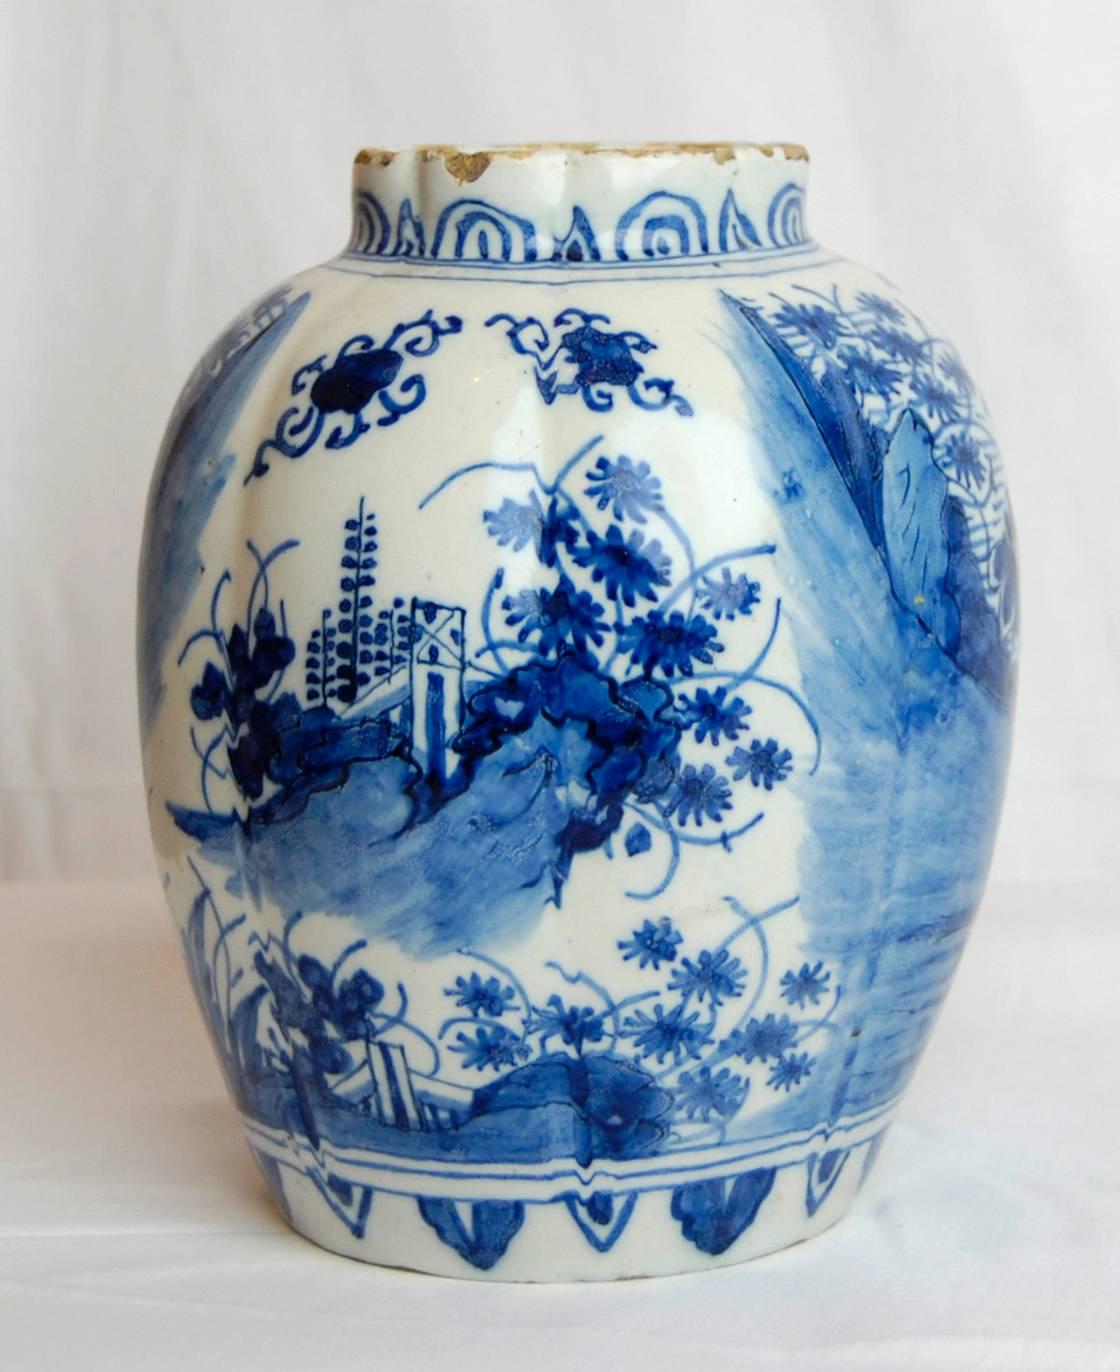 Hand-Painted 18th Century Dutch Delft Porcelain Vase Blue and White Chinoiserie Painting